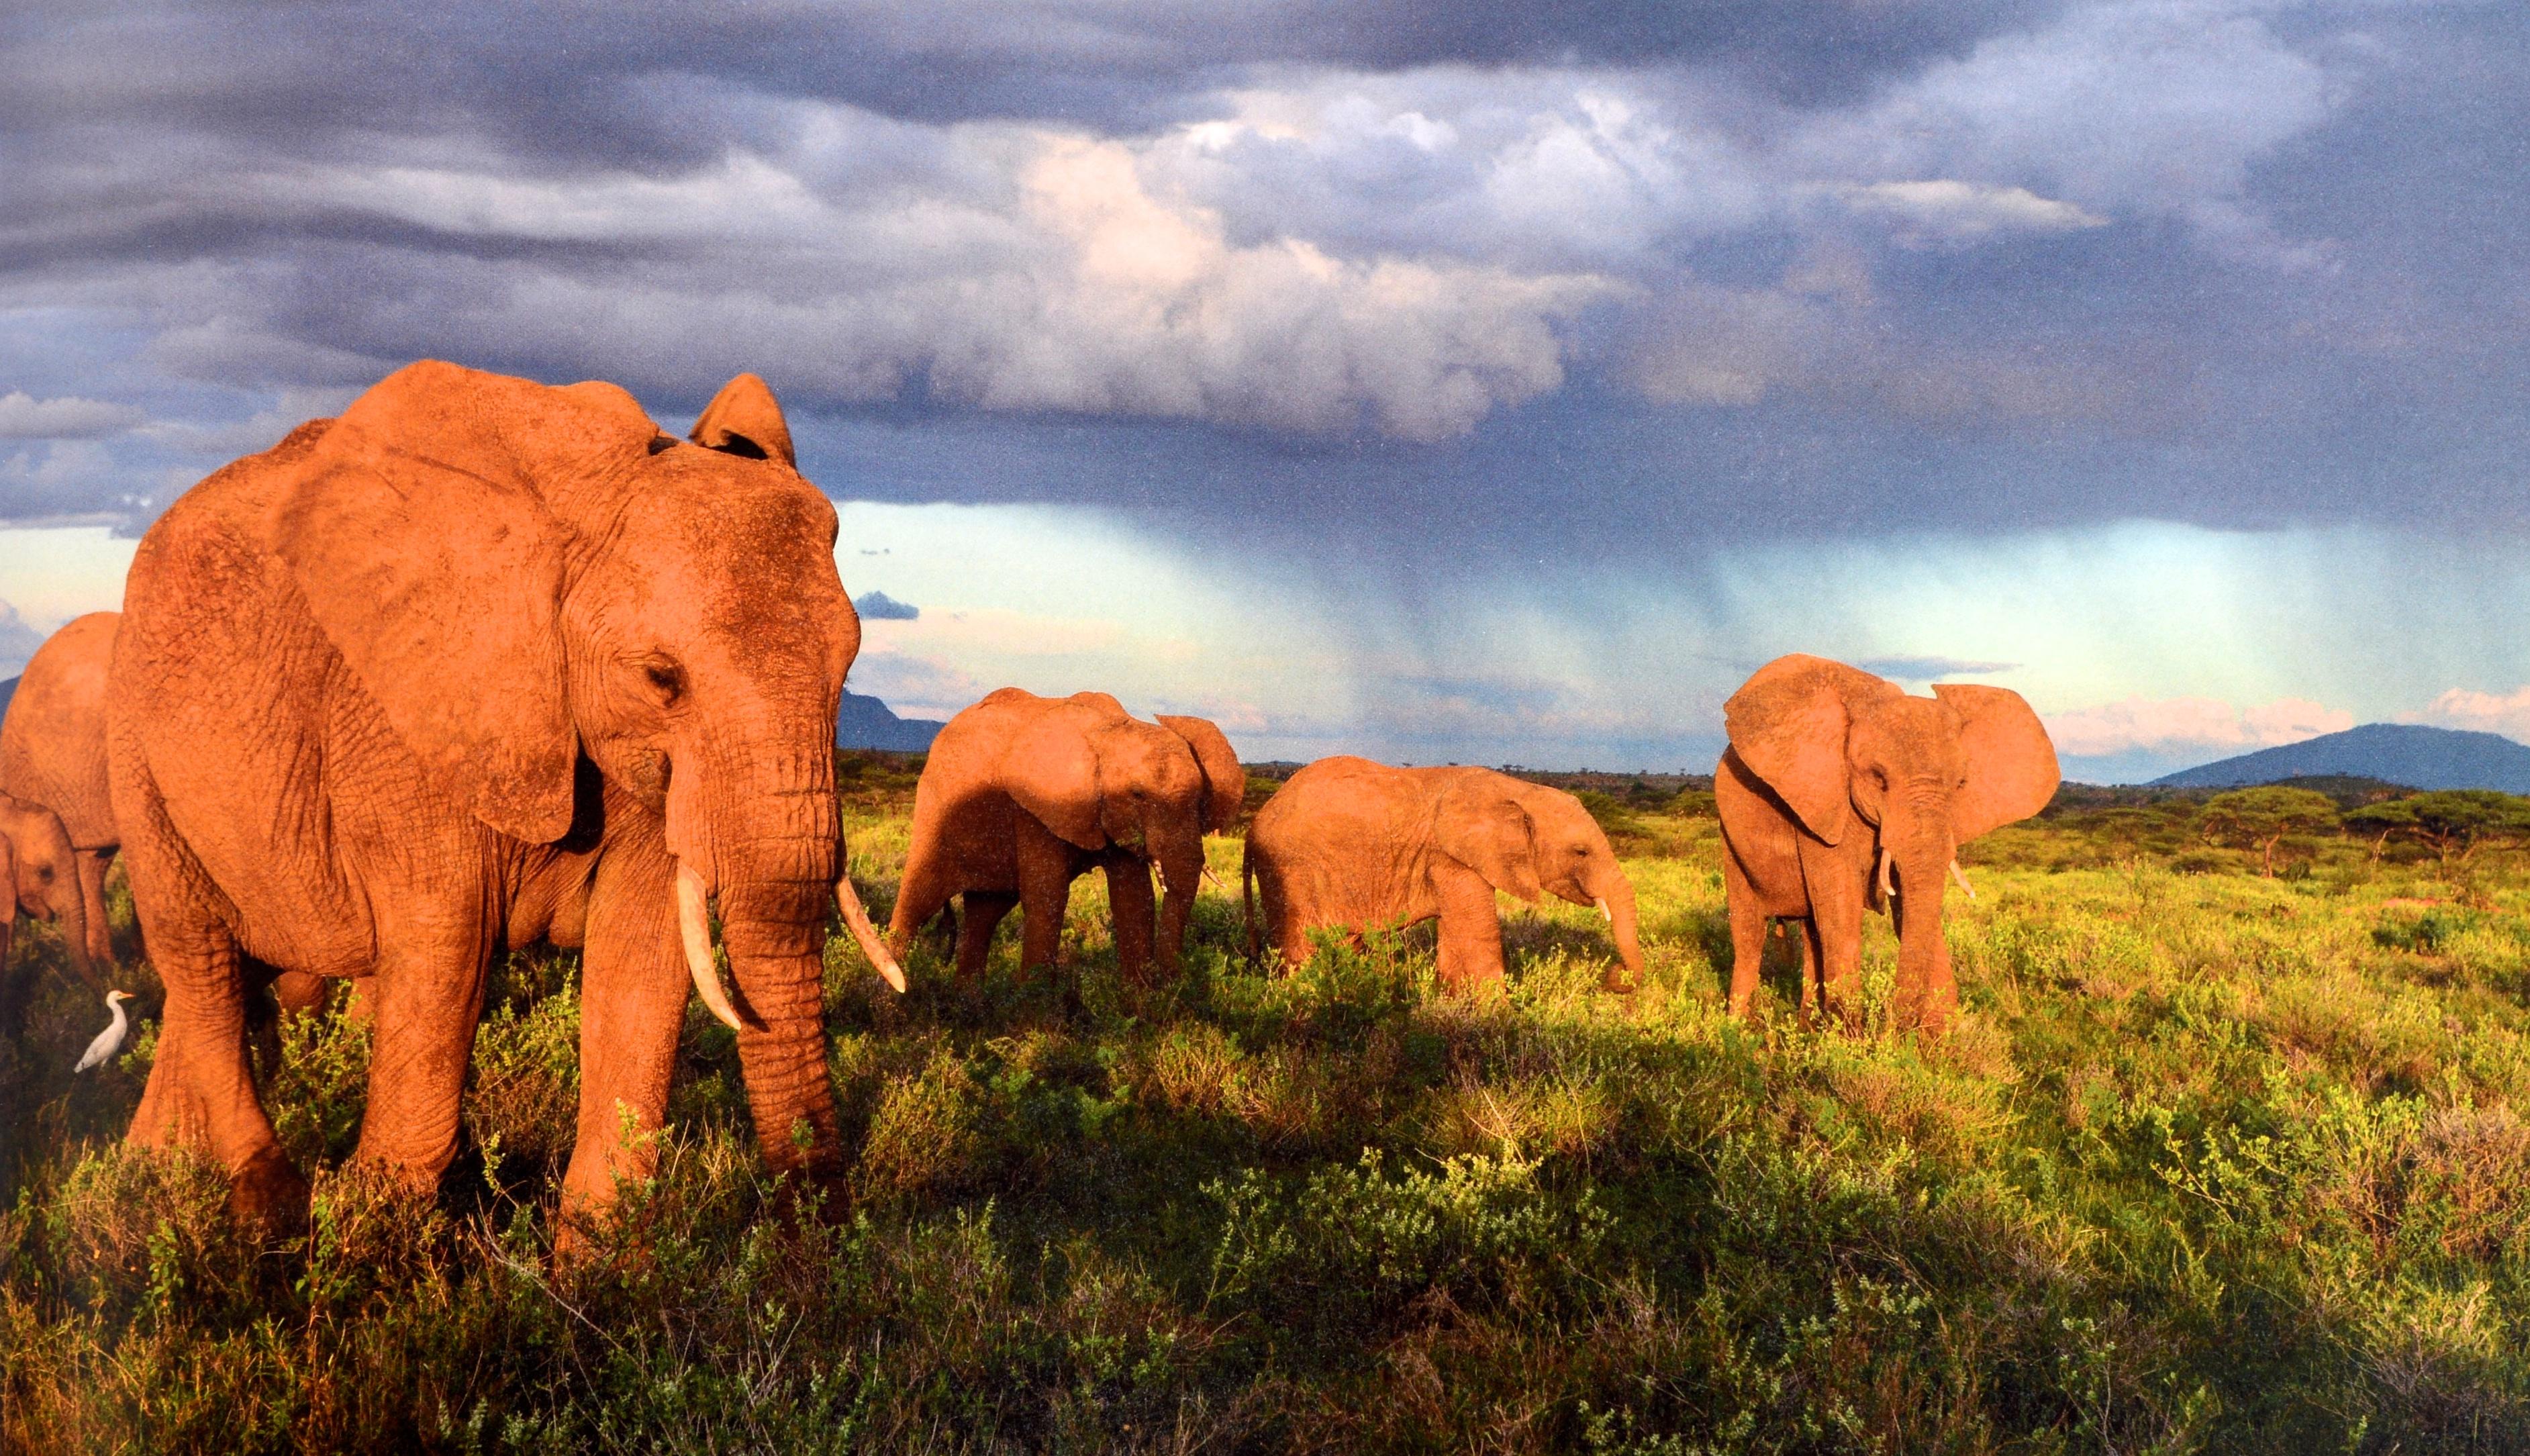 Earth to Sky: Among Africa's Elephants, a Species in Crisis von Michael Nichols im Angebot 2